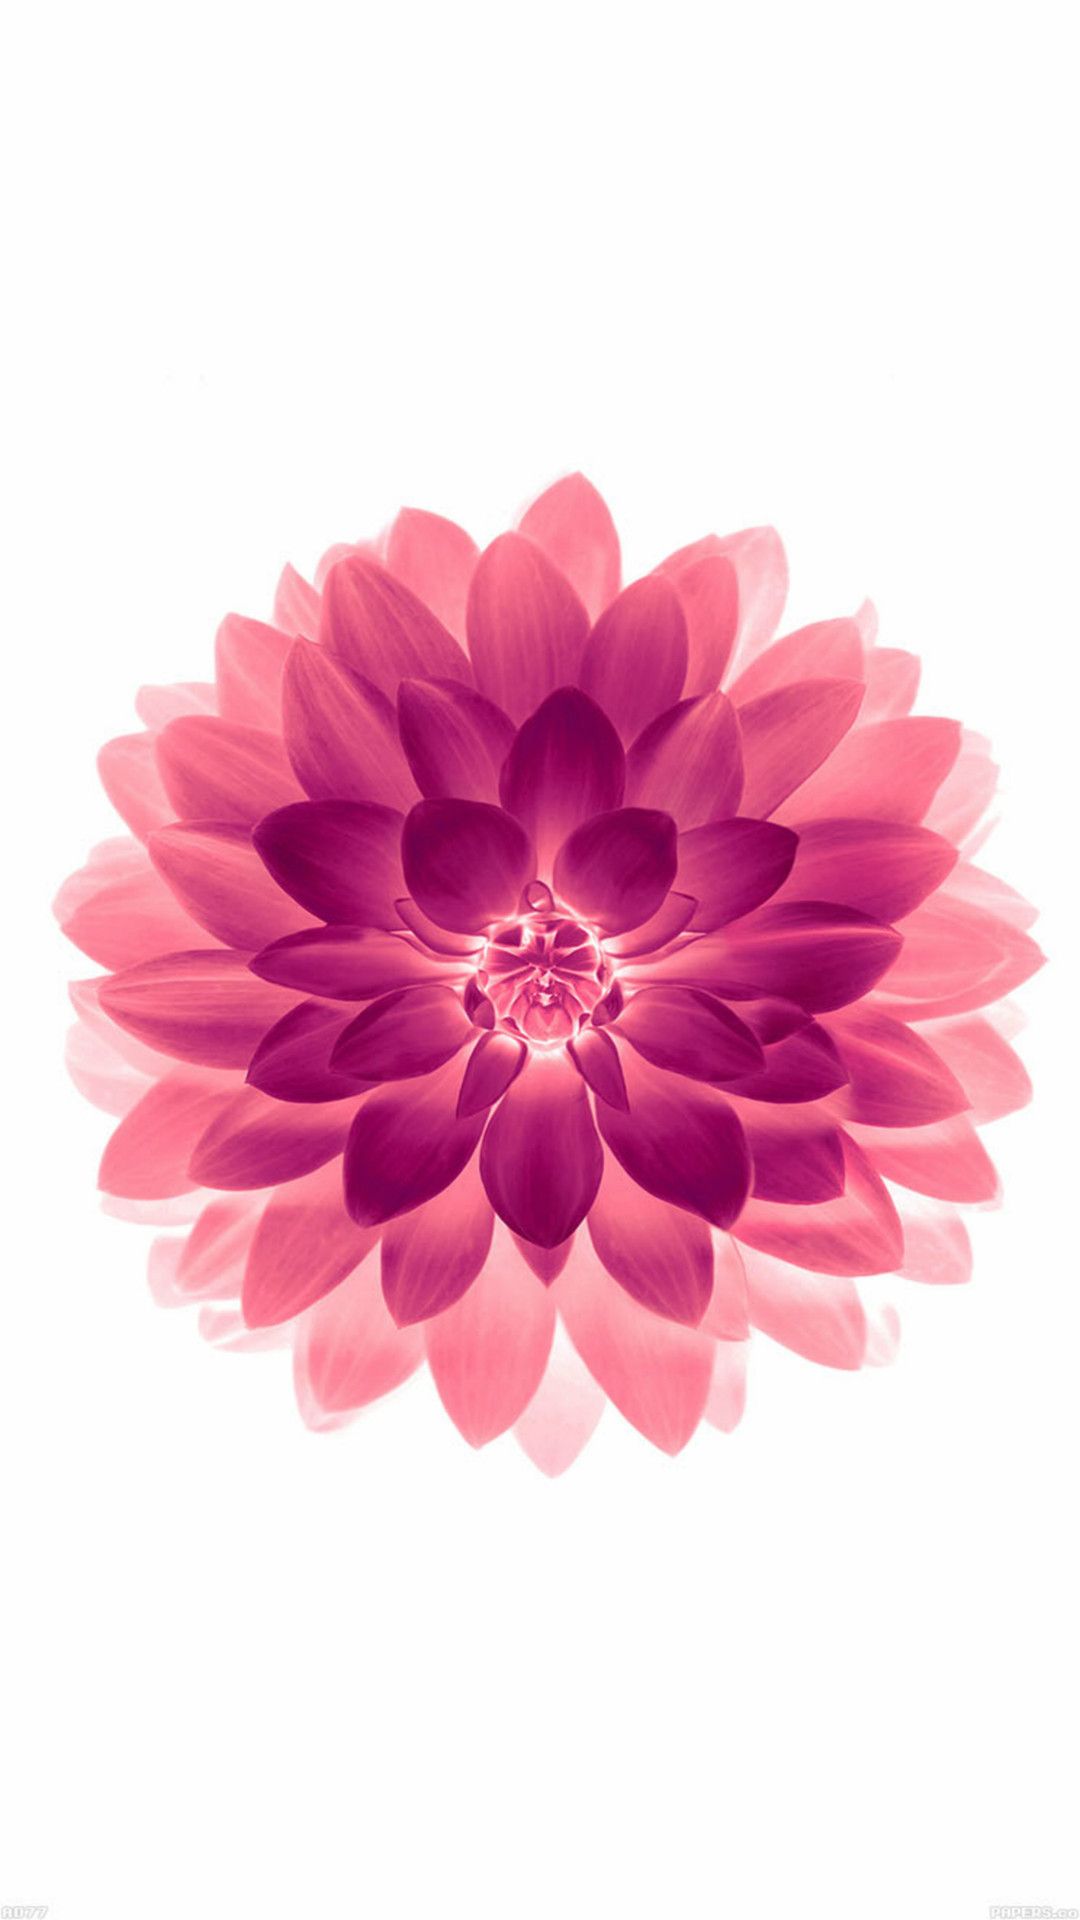 Pink And White Flower Wallpapers